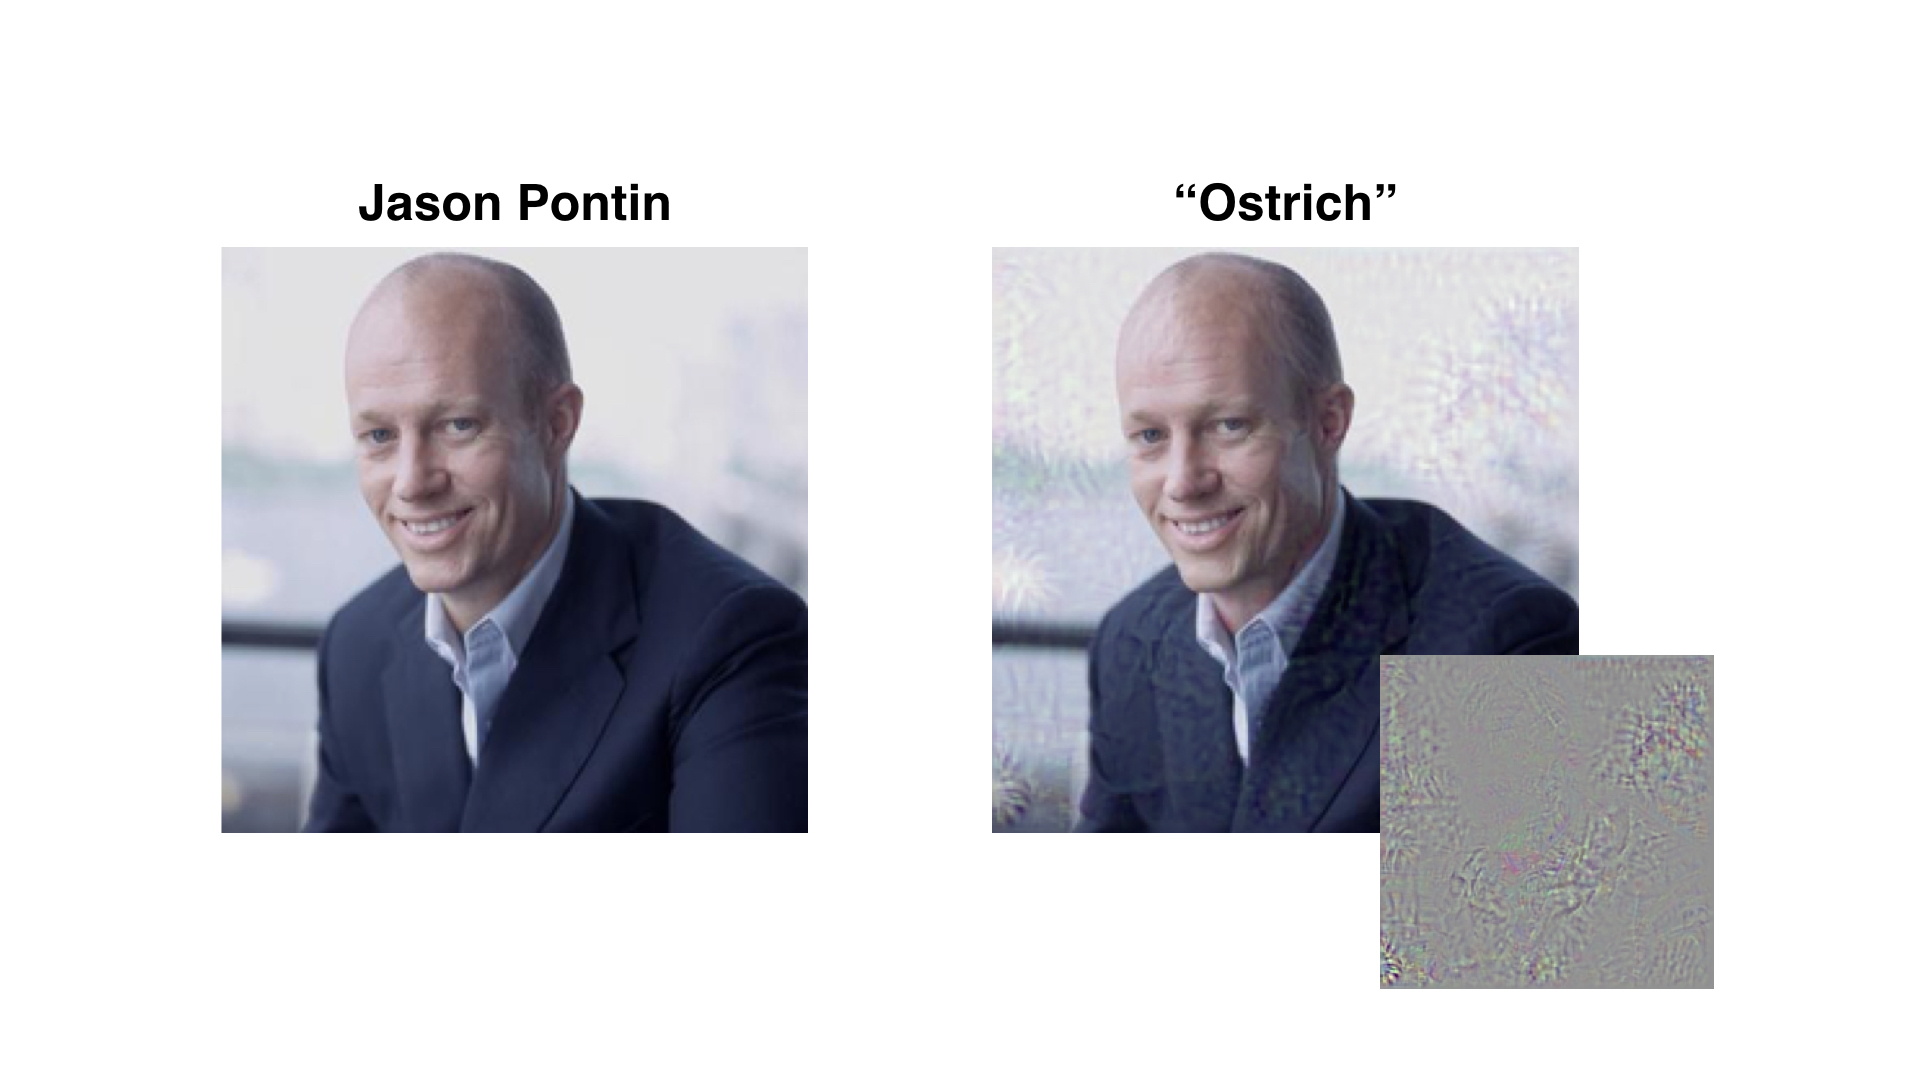 With a little bit of added noise (lower right), a computer can be fooled into thinking that an image of MIT Technology Review's Editor-in-Chief Jason Pontin is in fact an ostrich.